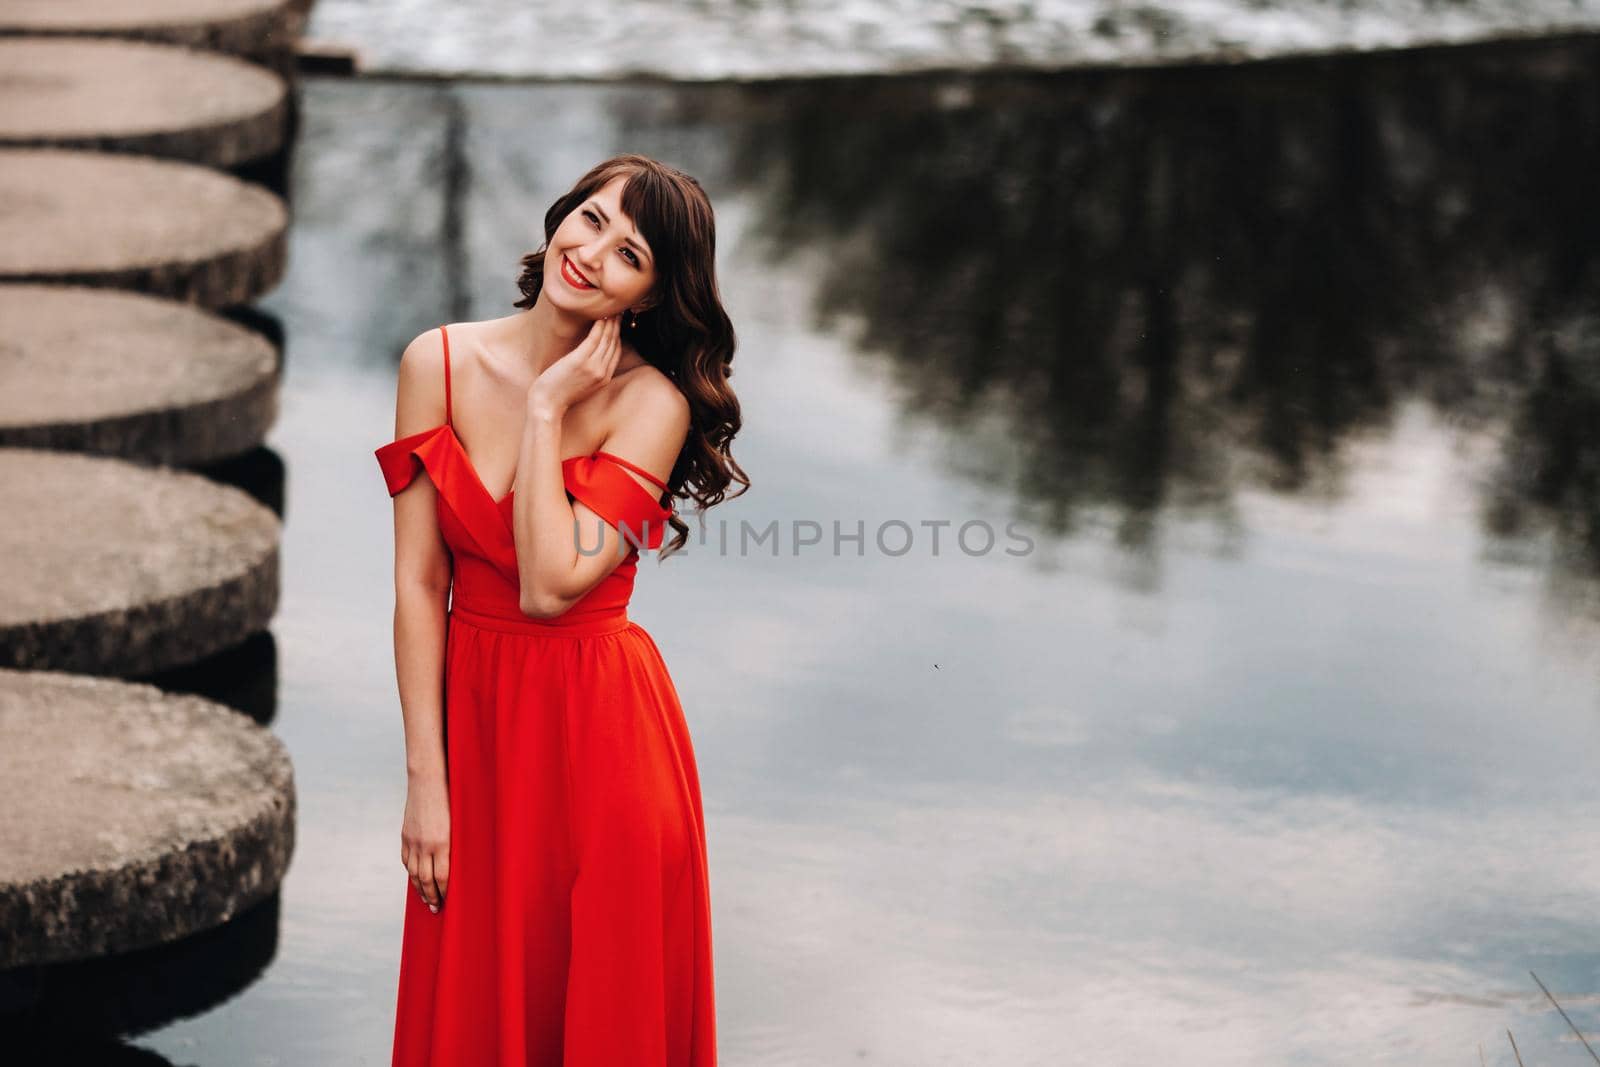 girl in a long red dress near the lake in the Park at sunset